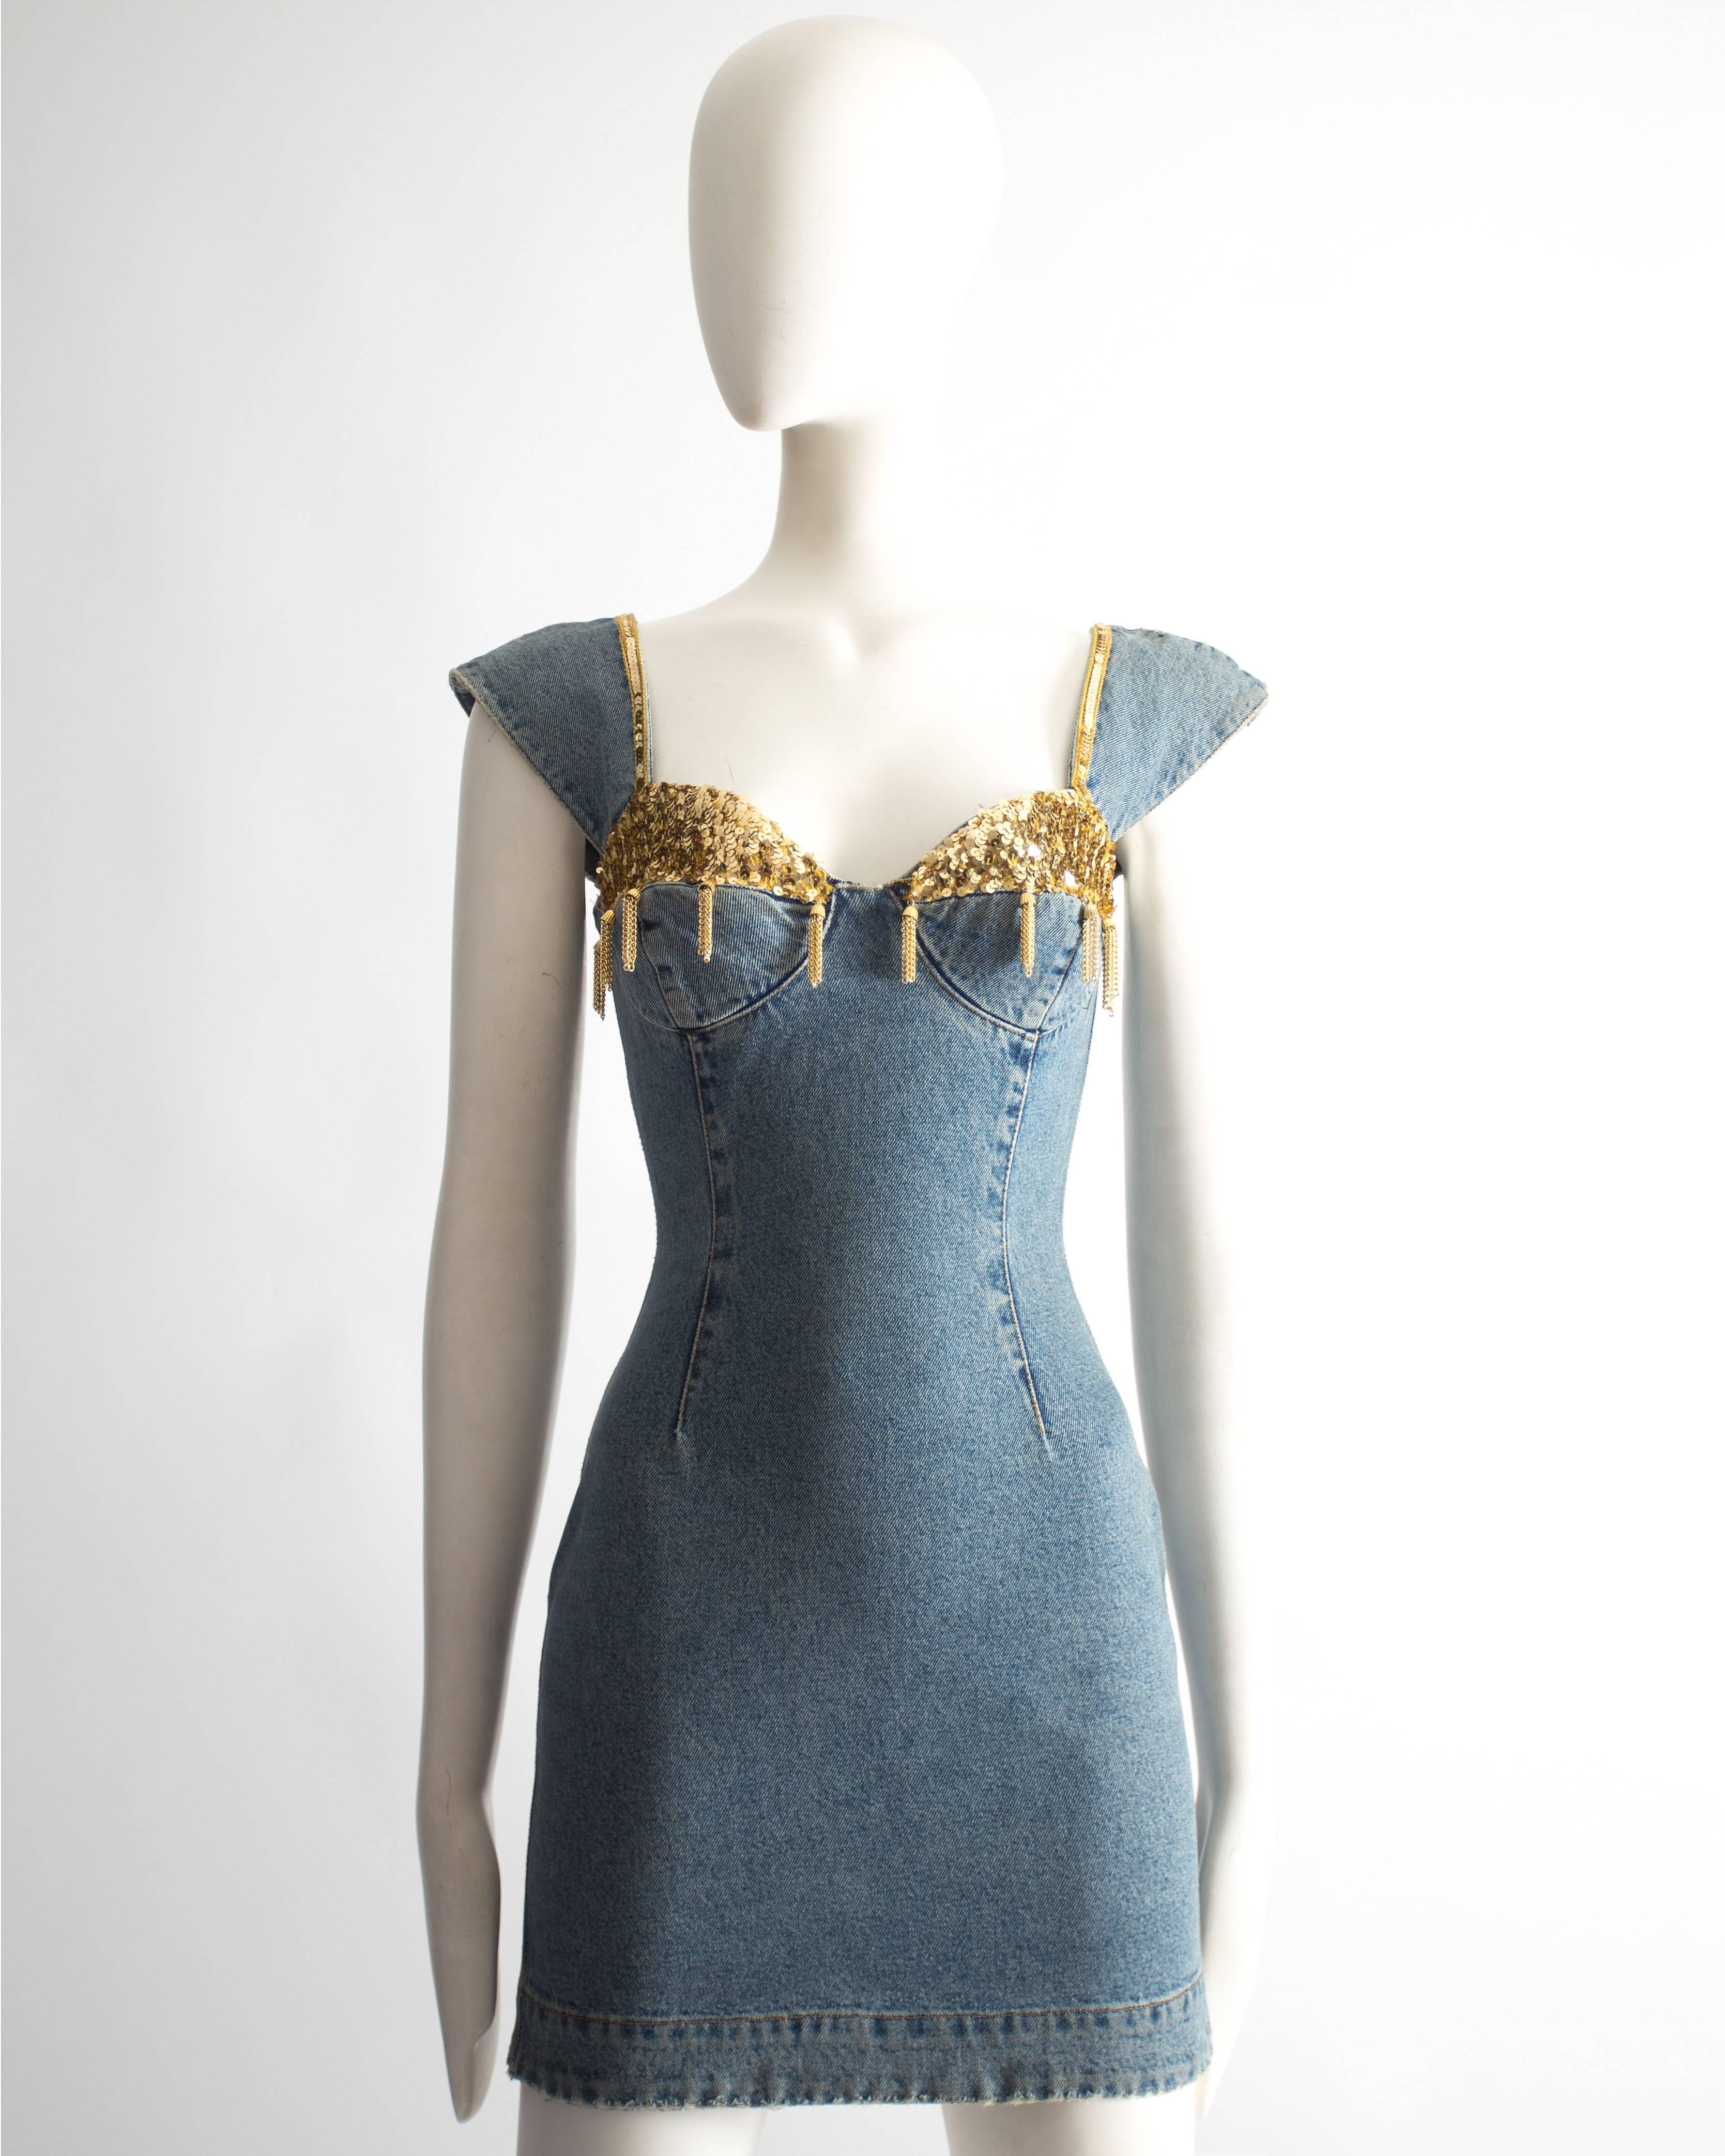 Katharine Hamnett denim mini dress. Sequin bust with chain tassels, capped sleeves, zip fastening at the back and two zip pockets.